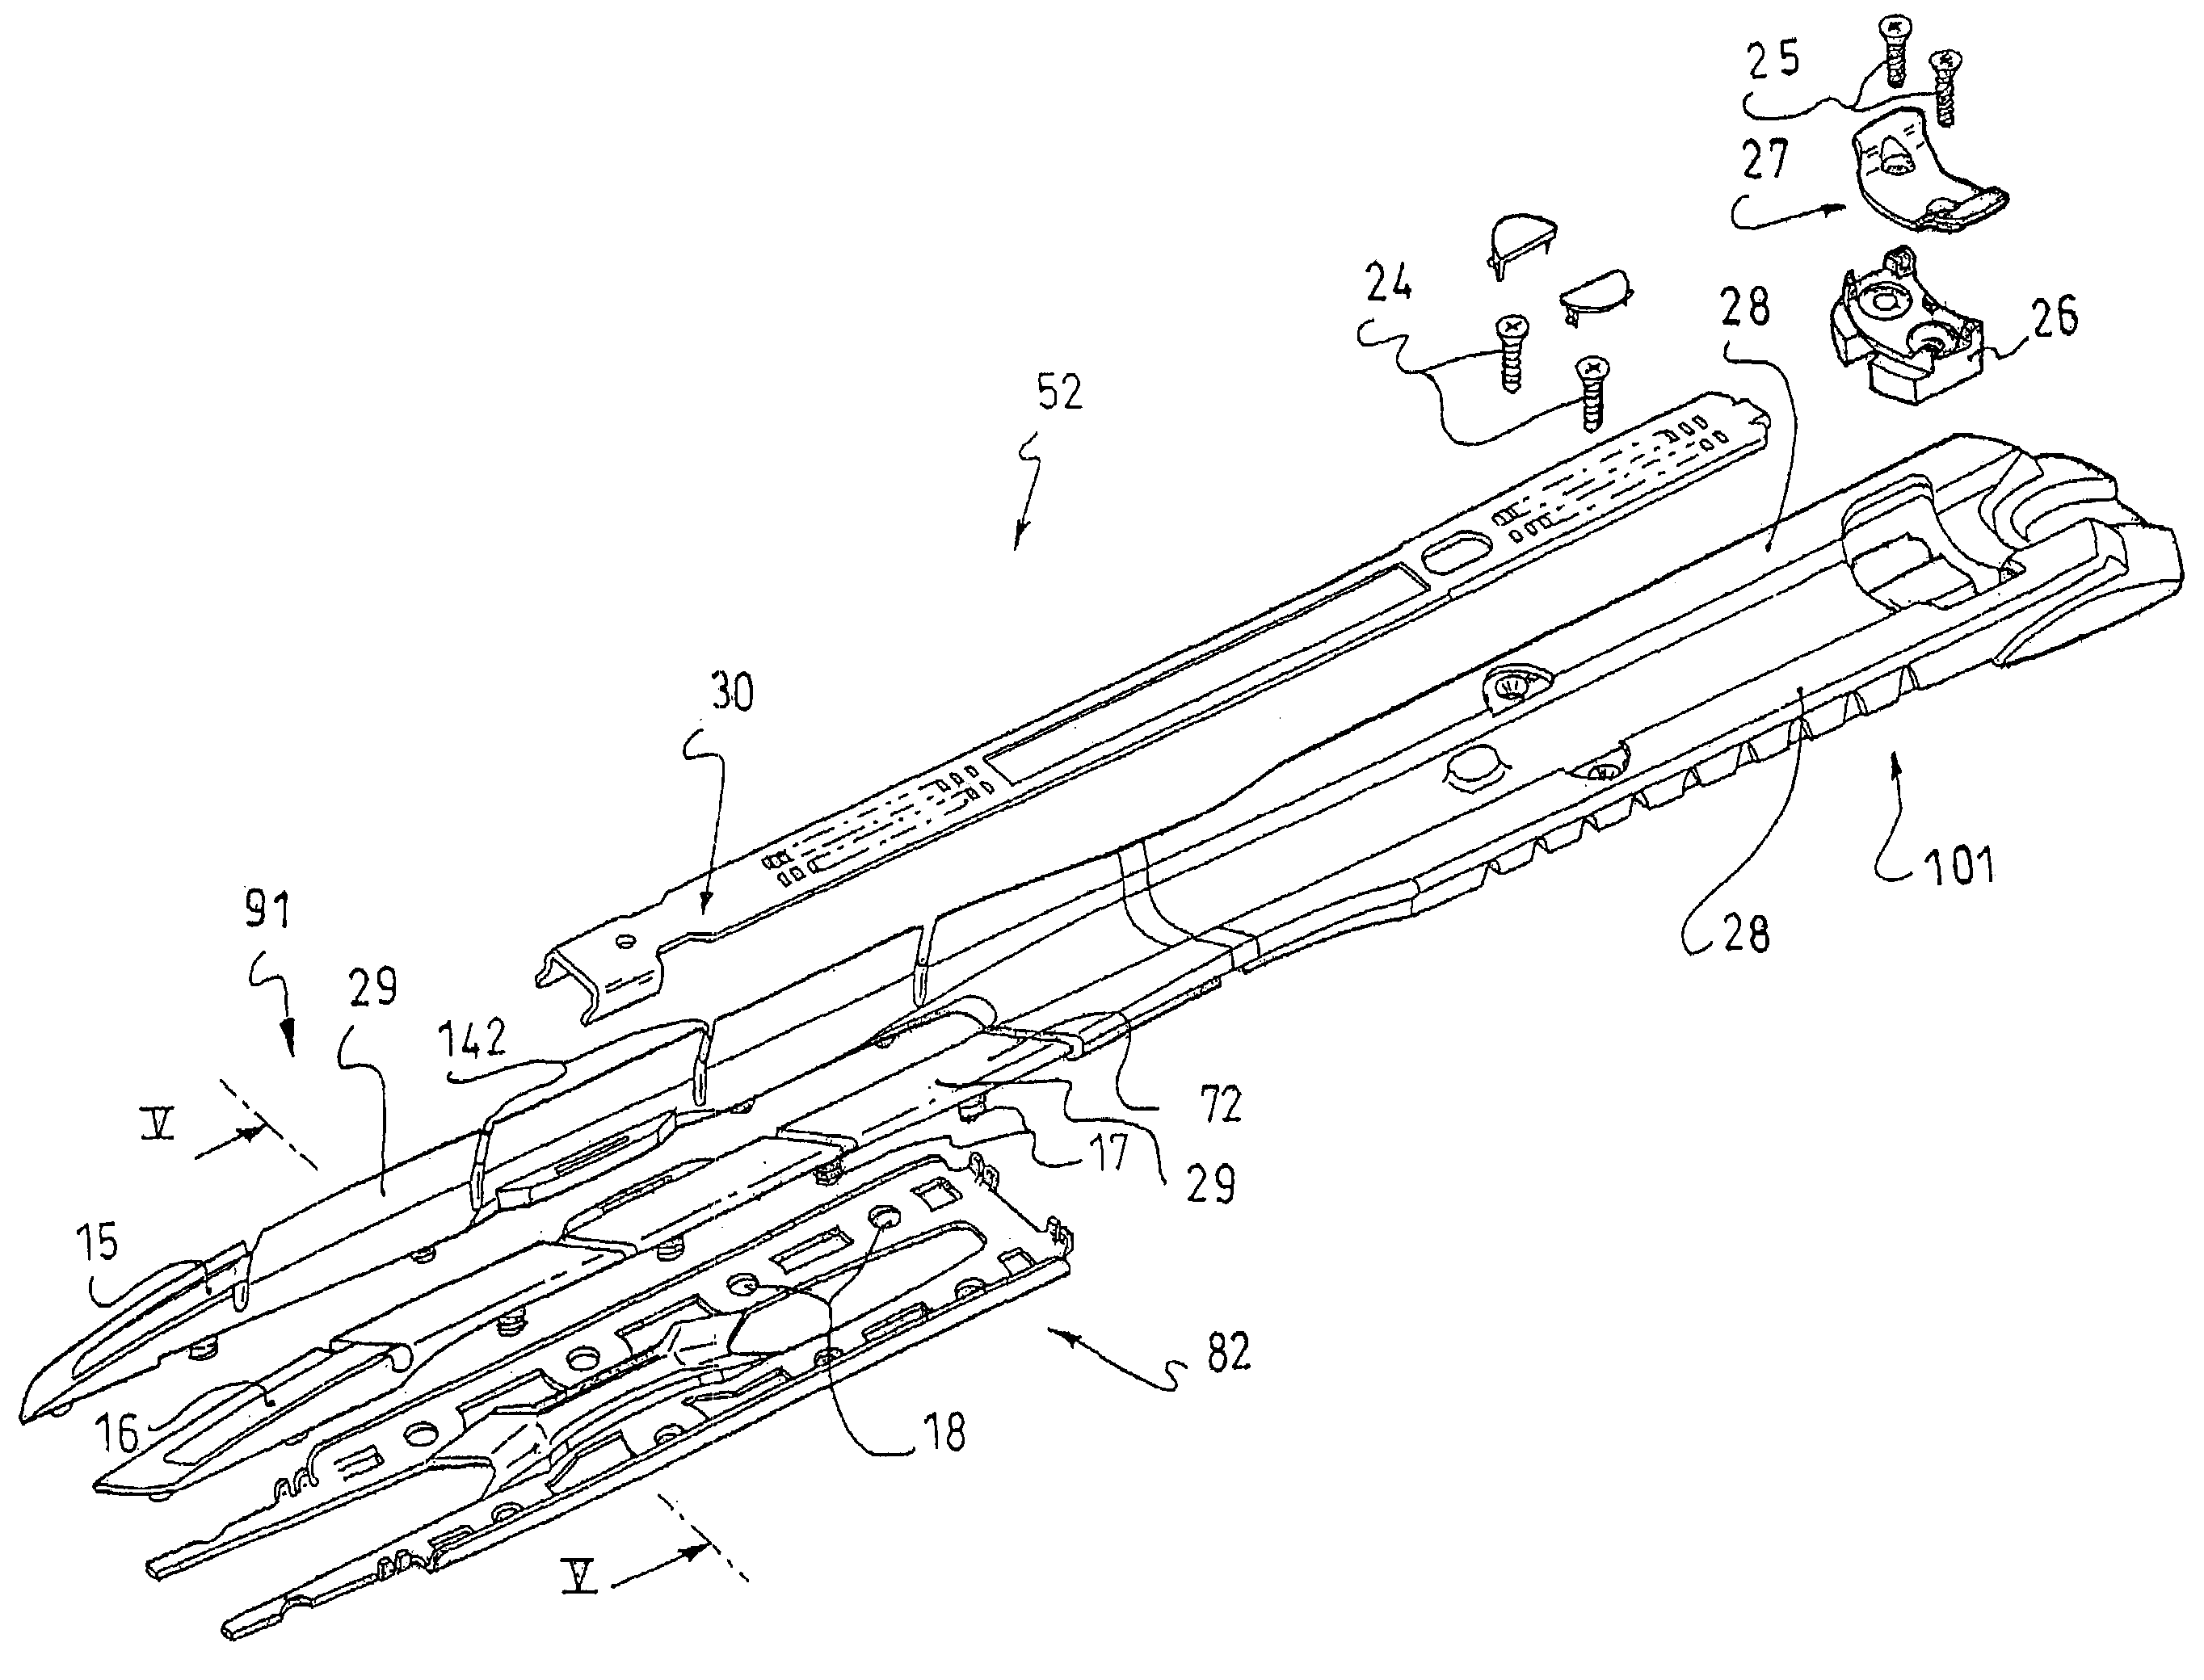 Interface device for a gliding board, a gliding apparatus including such device, and a method of manufacture